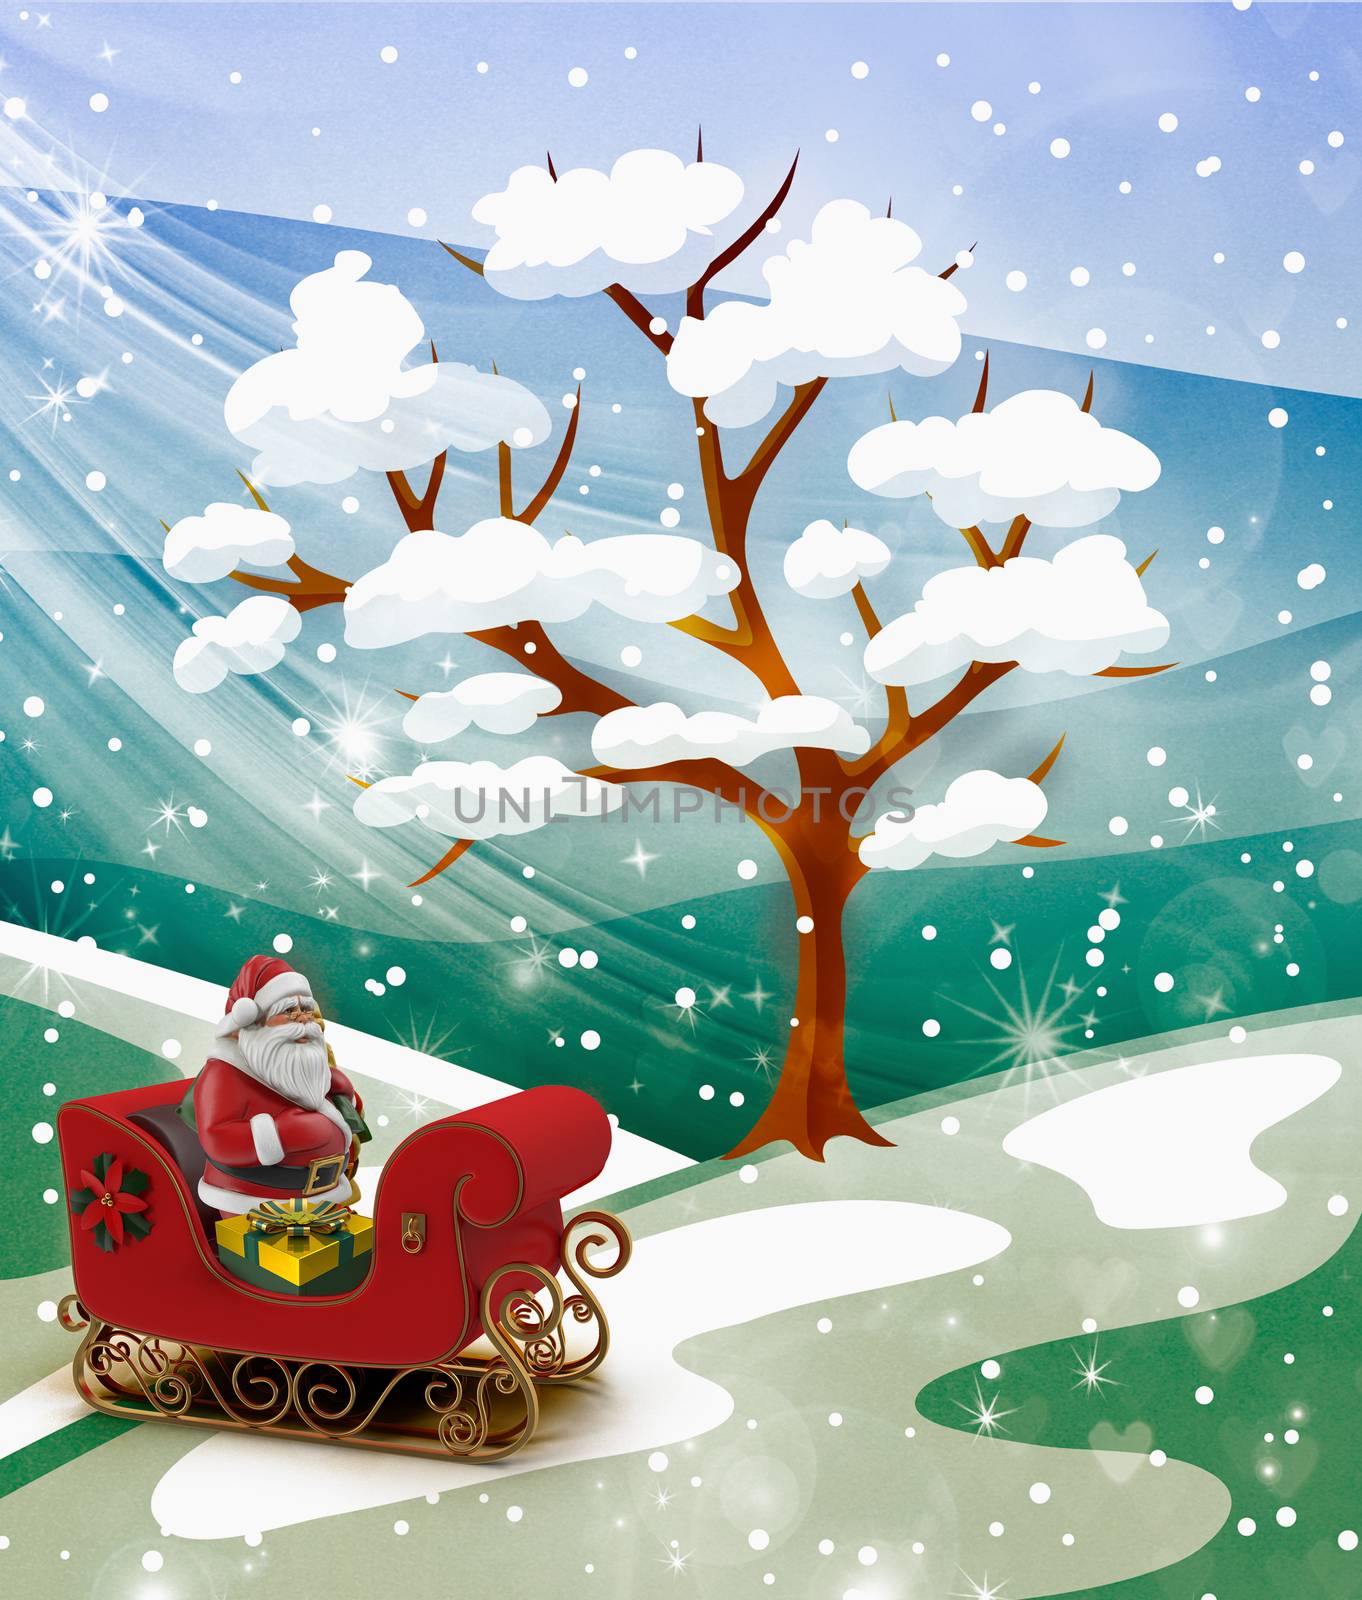 Christmas story: Santa Claus with gifts for the holiday by georgina198